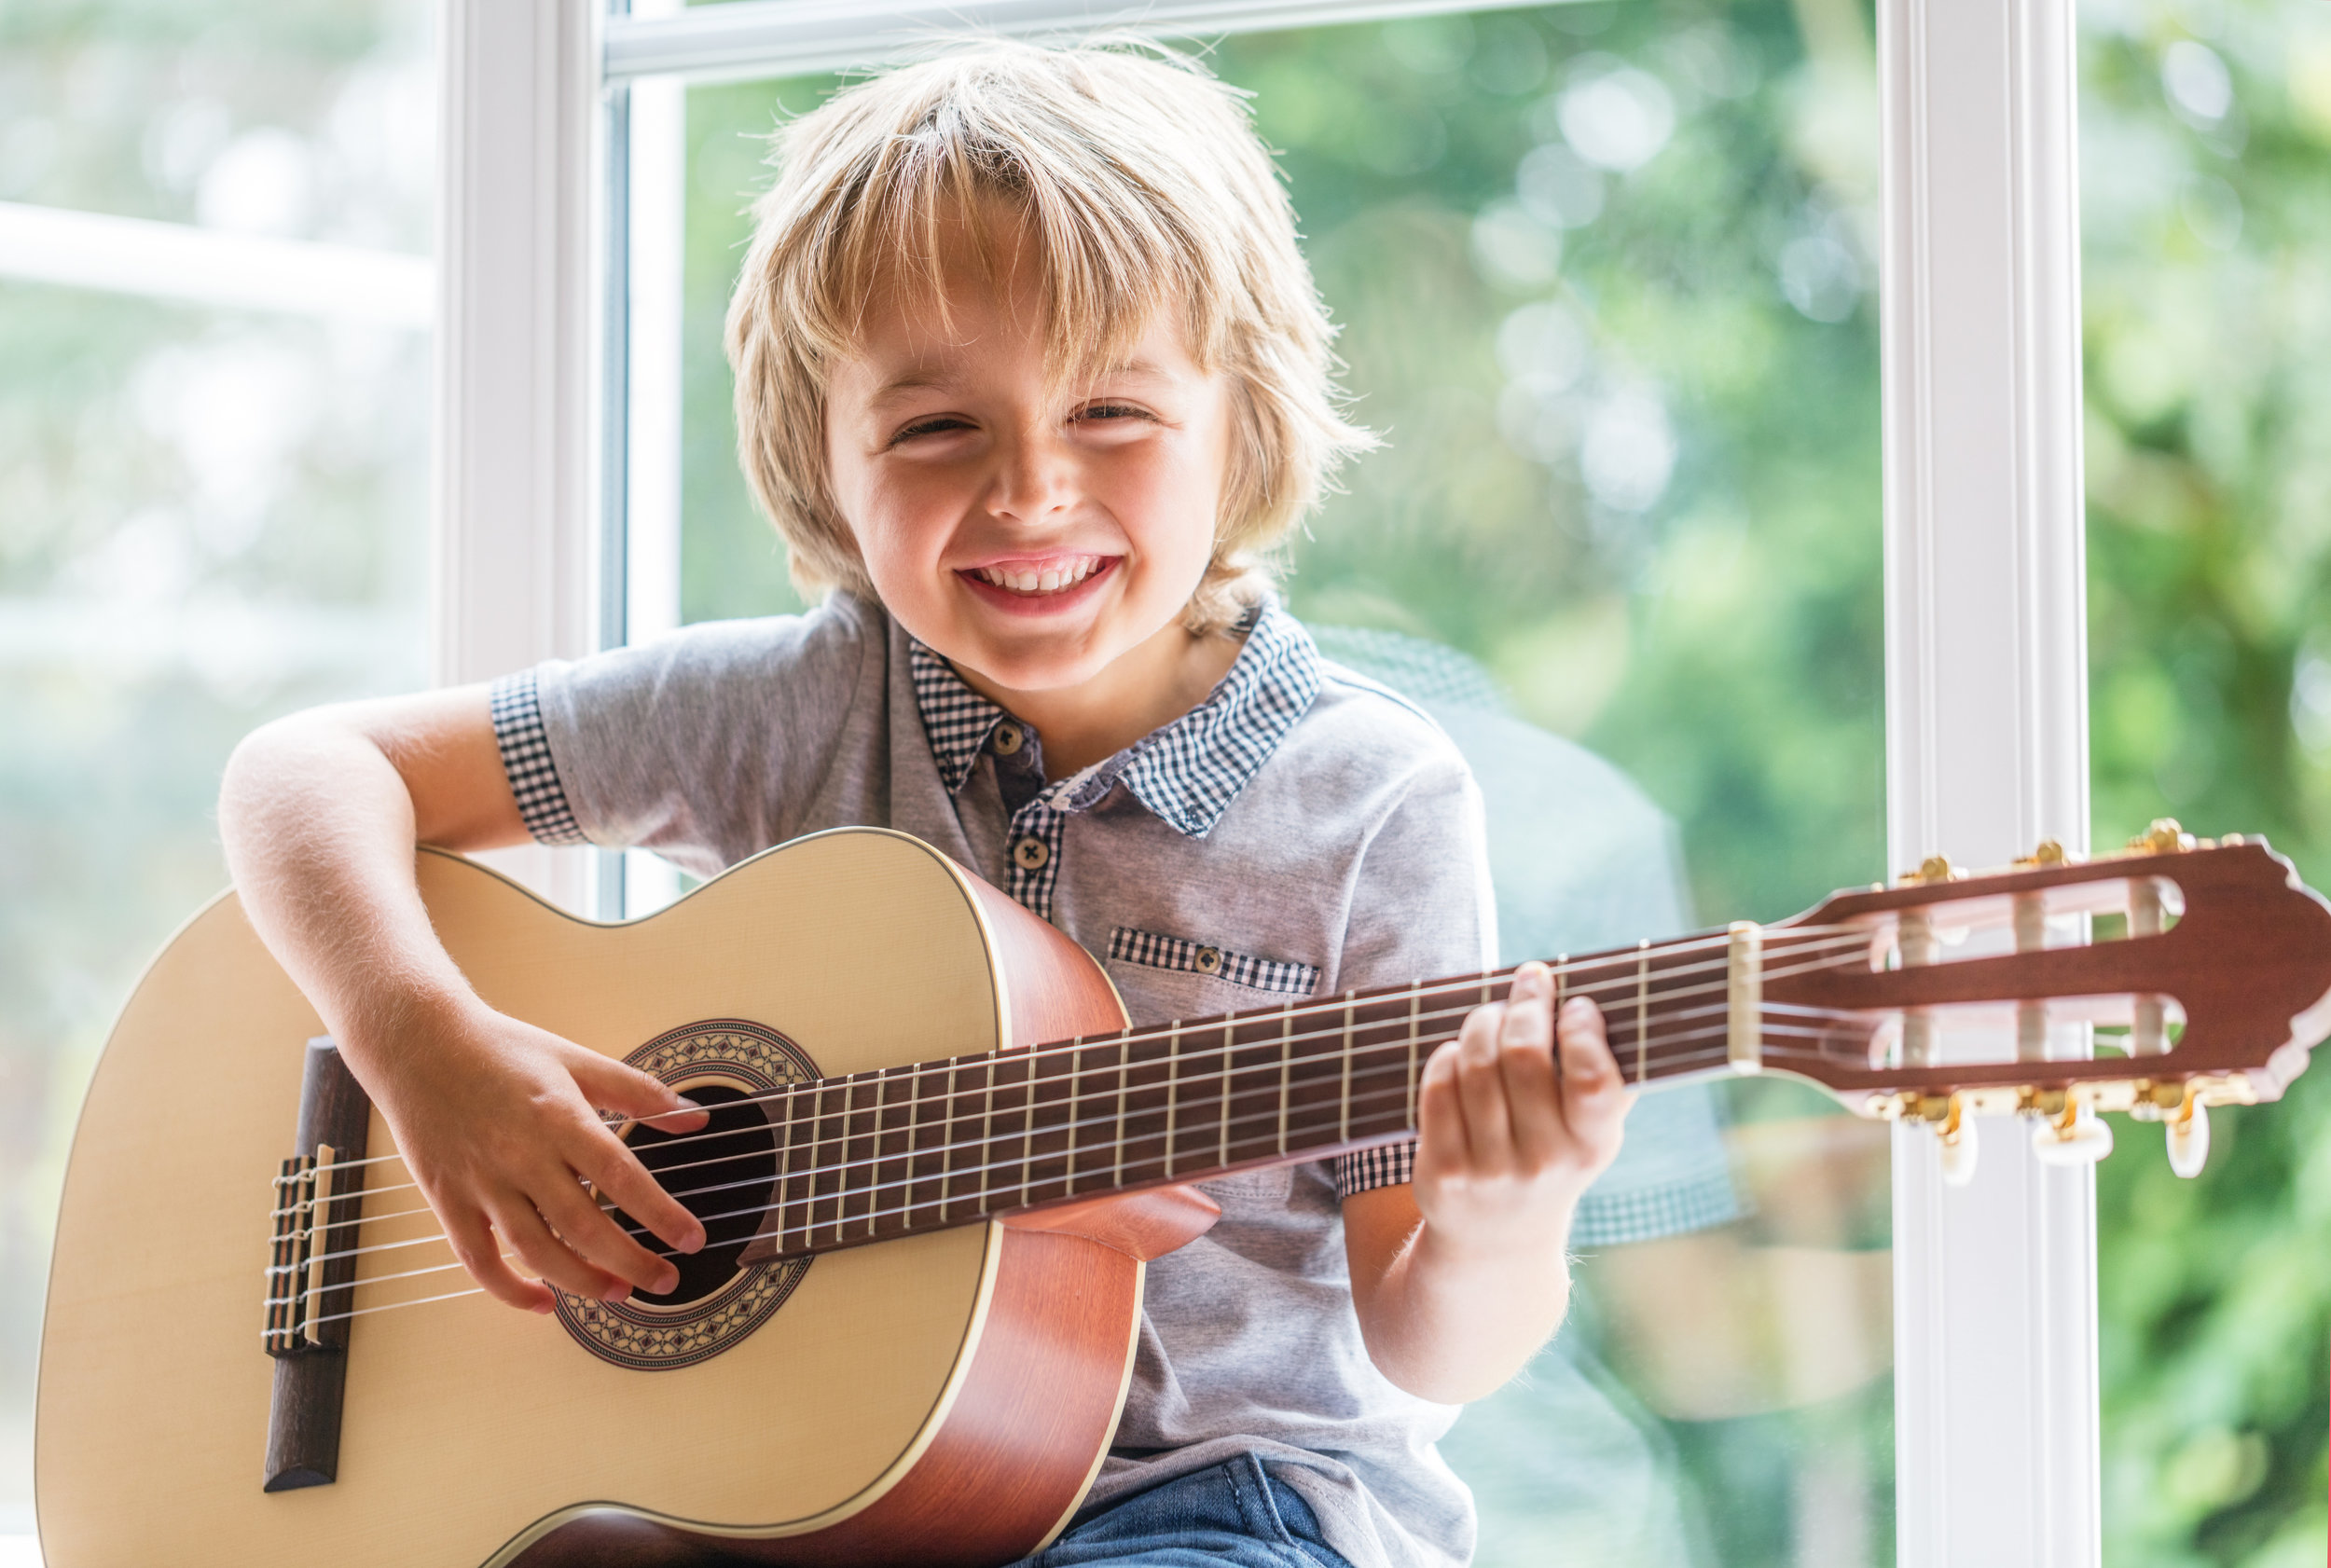 cms istock young blonde boy with guitar.jpg